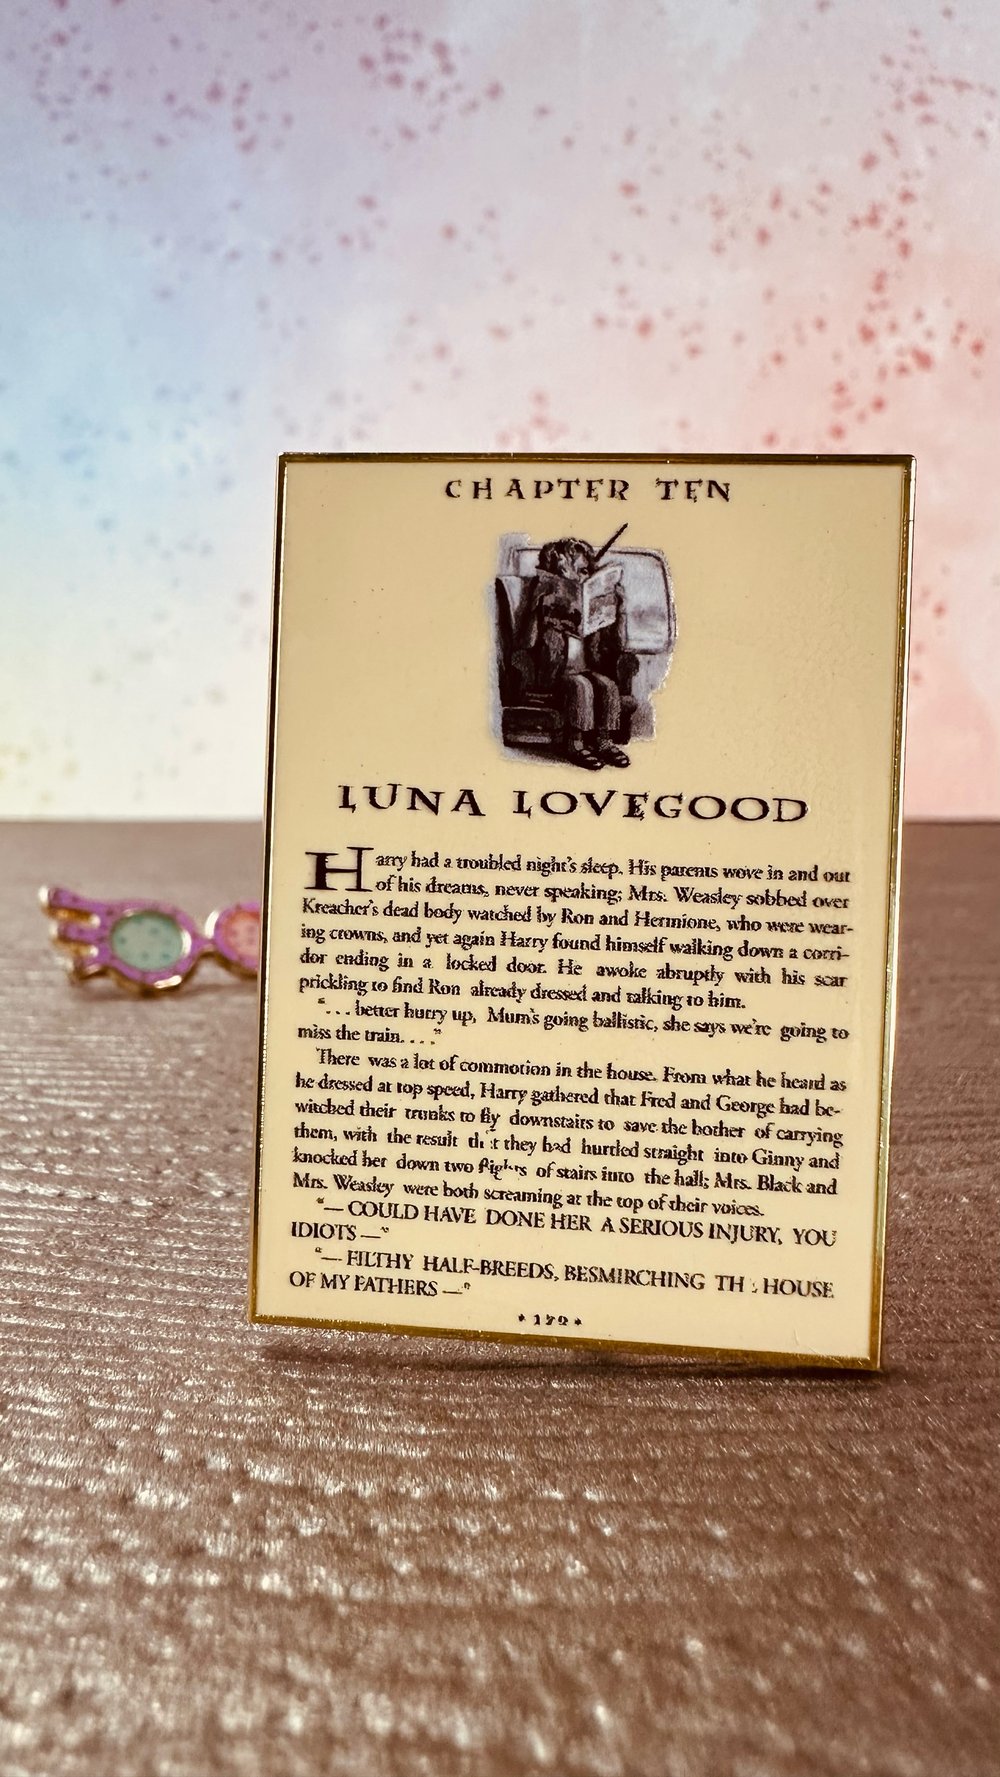 Image of Chapter 10 Luna Luvgood